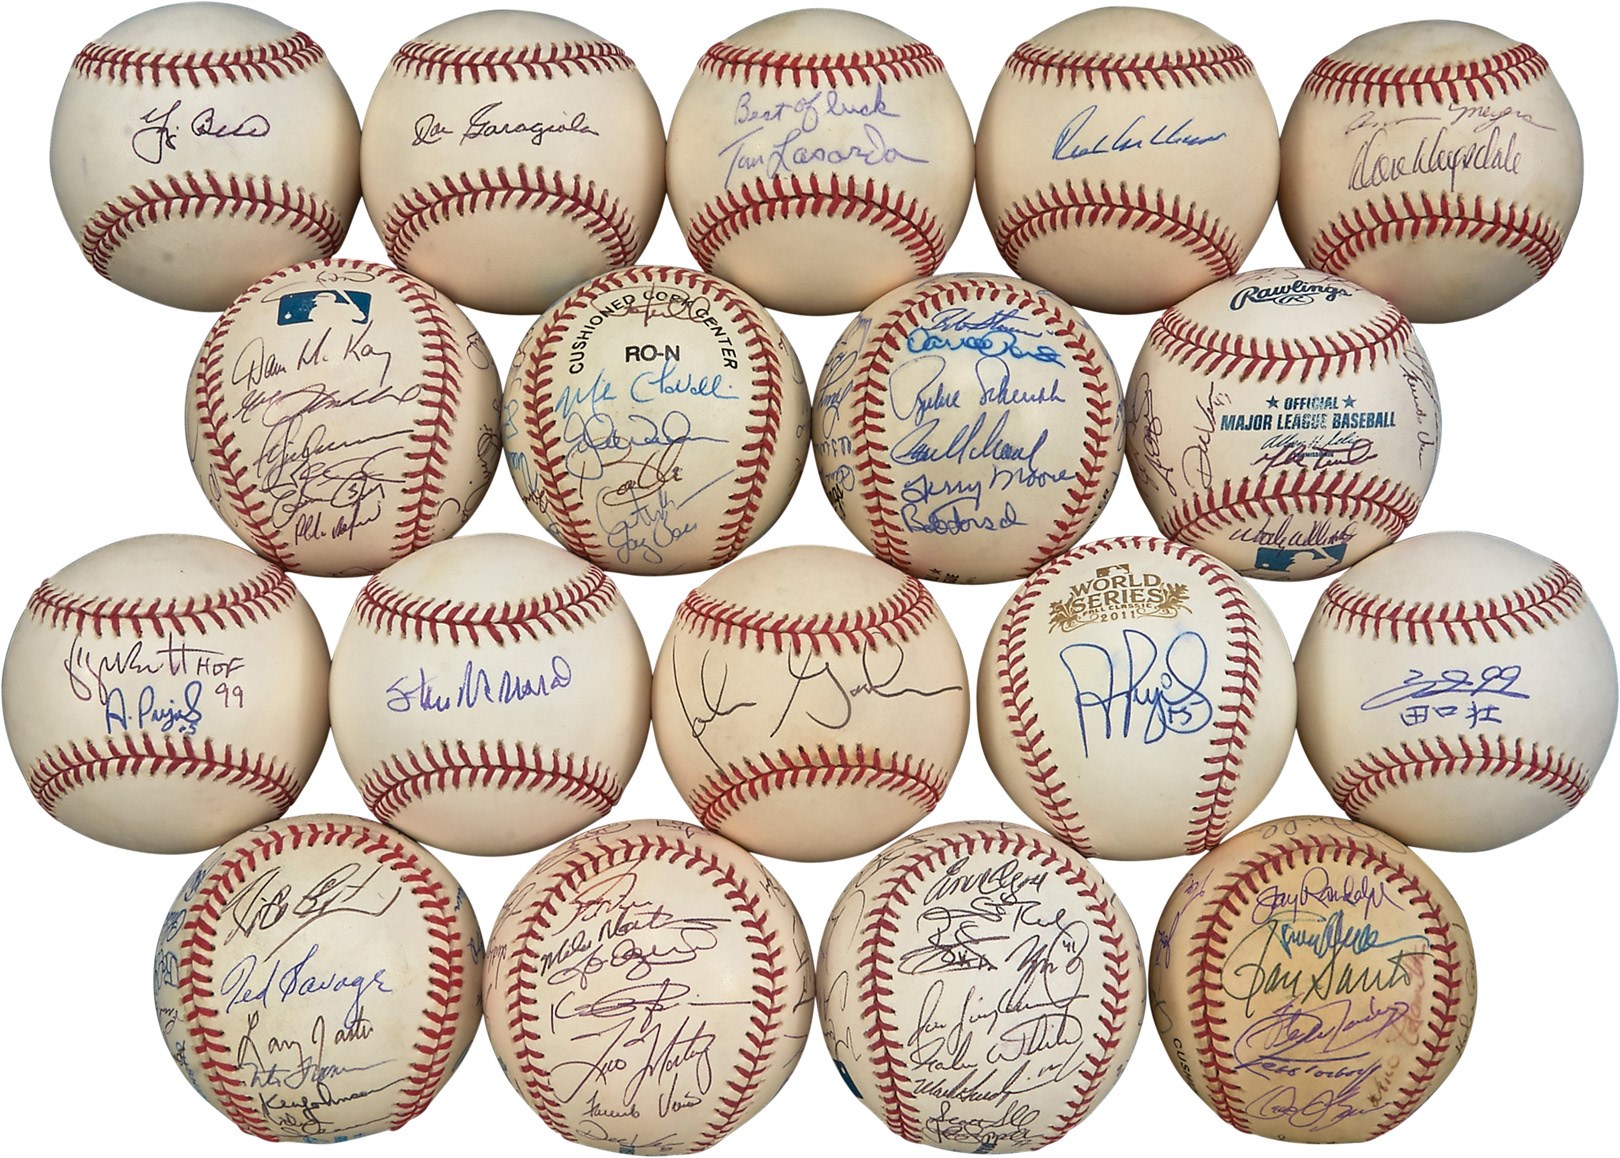 St. Louis Cardinals - Large Collection of Single-Signed and Team-Signed Baseballs - Balance of Shannon Collection (260+)